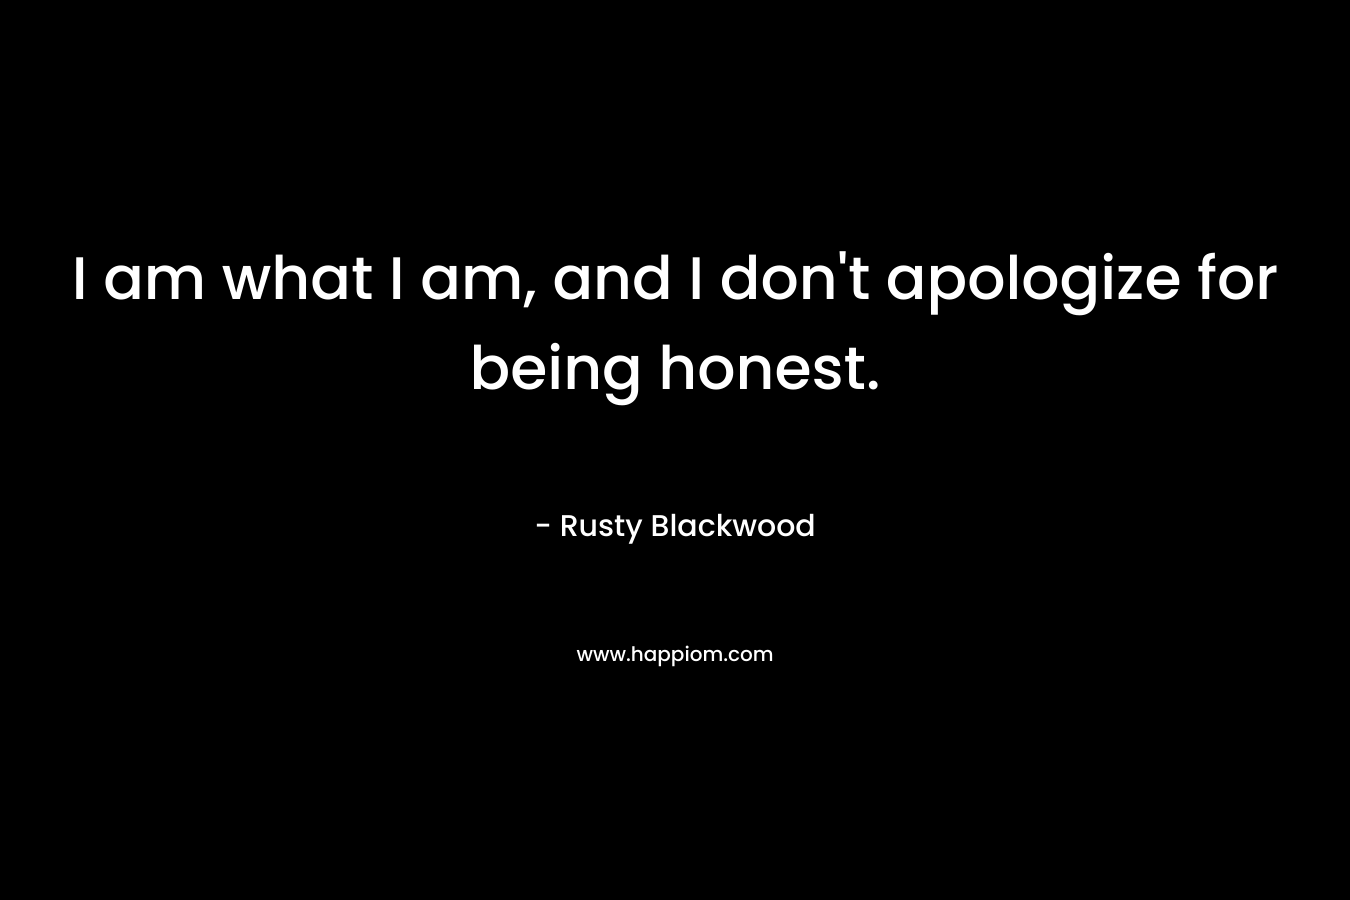 I am what I am, and I don’t apologize for being honest. – Rusty Blackwood